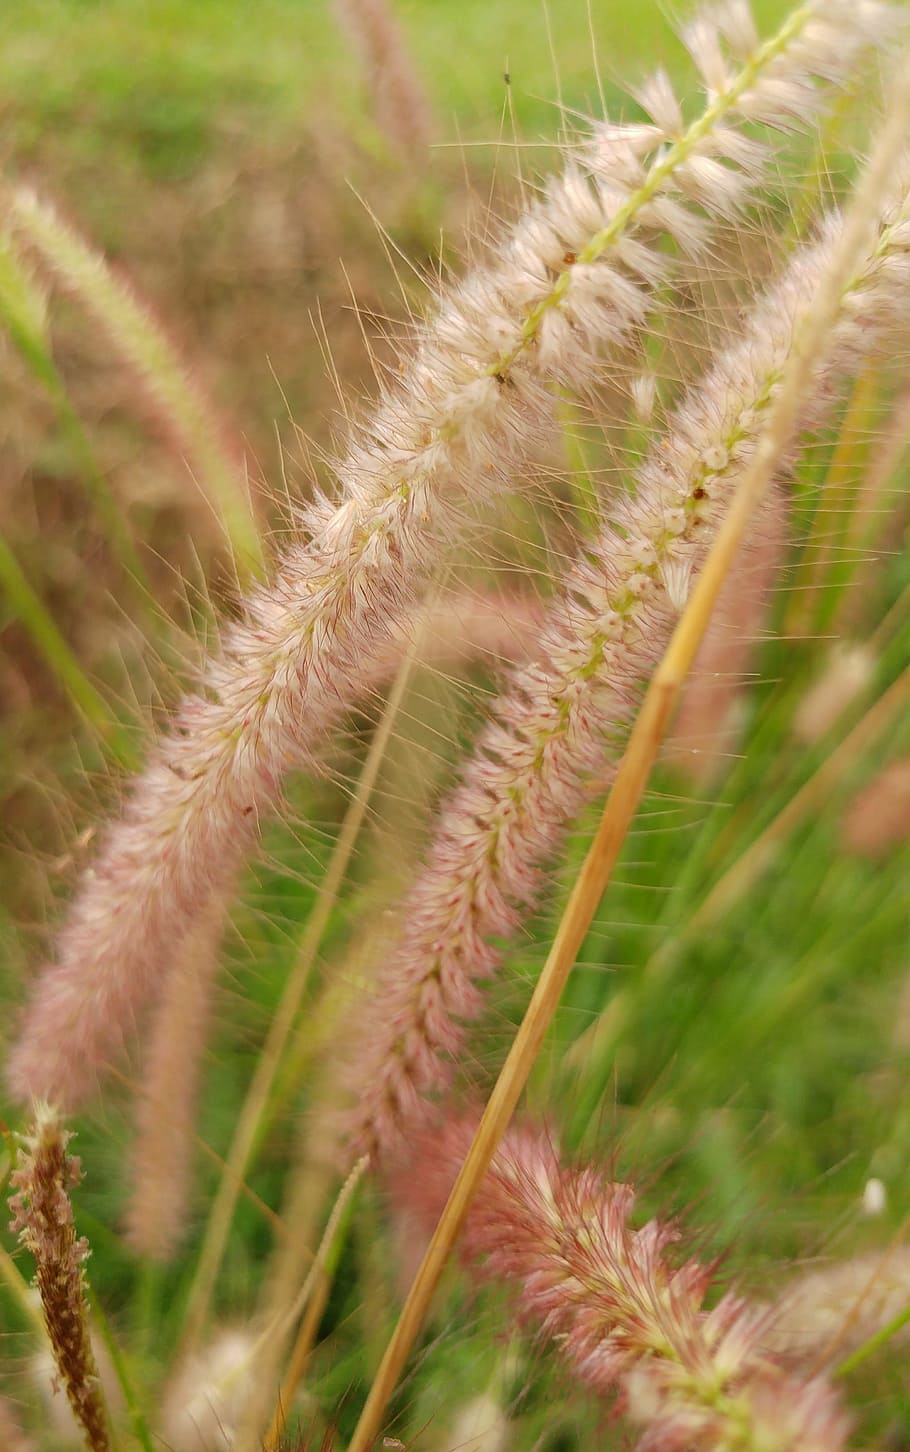 grass, shrubs flower, reed, hairy, meadow, environment, wind, growth, plant, nature